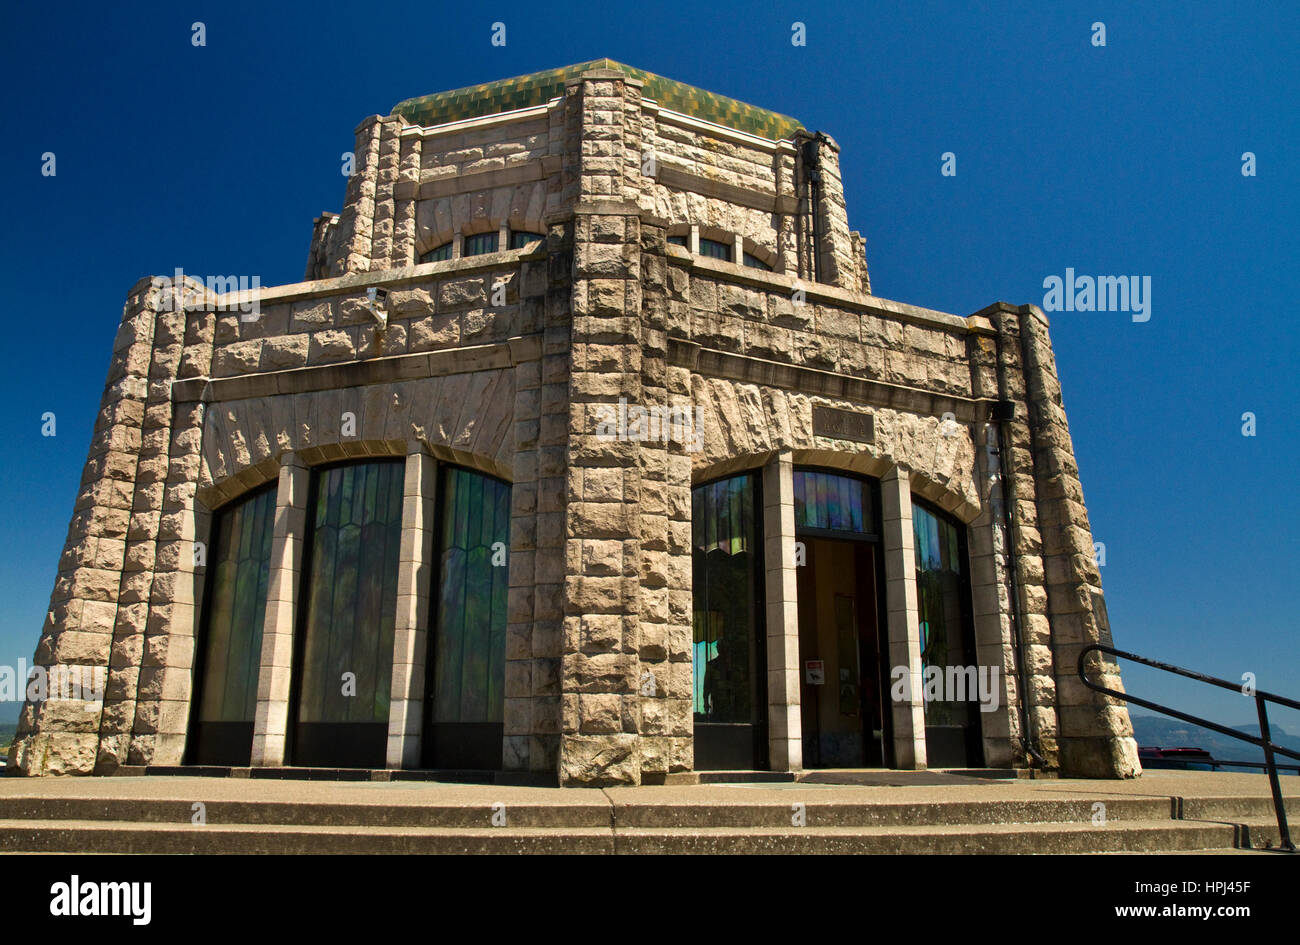 The Vista House observatory at Crown Point along the Historic Columbia River Highway in Multnomah County, Oregon, USA. Stock Photo